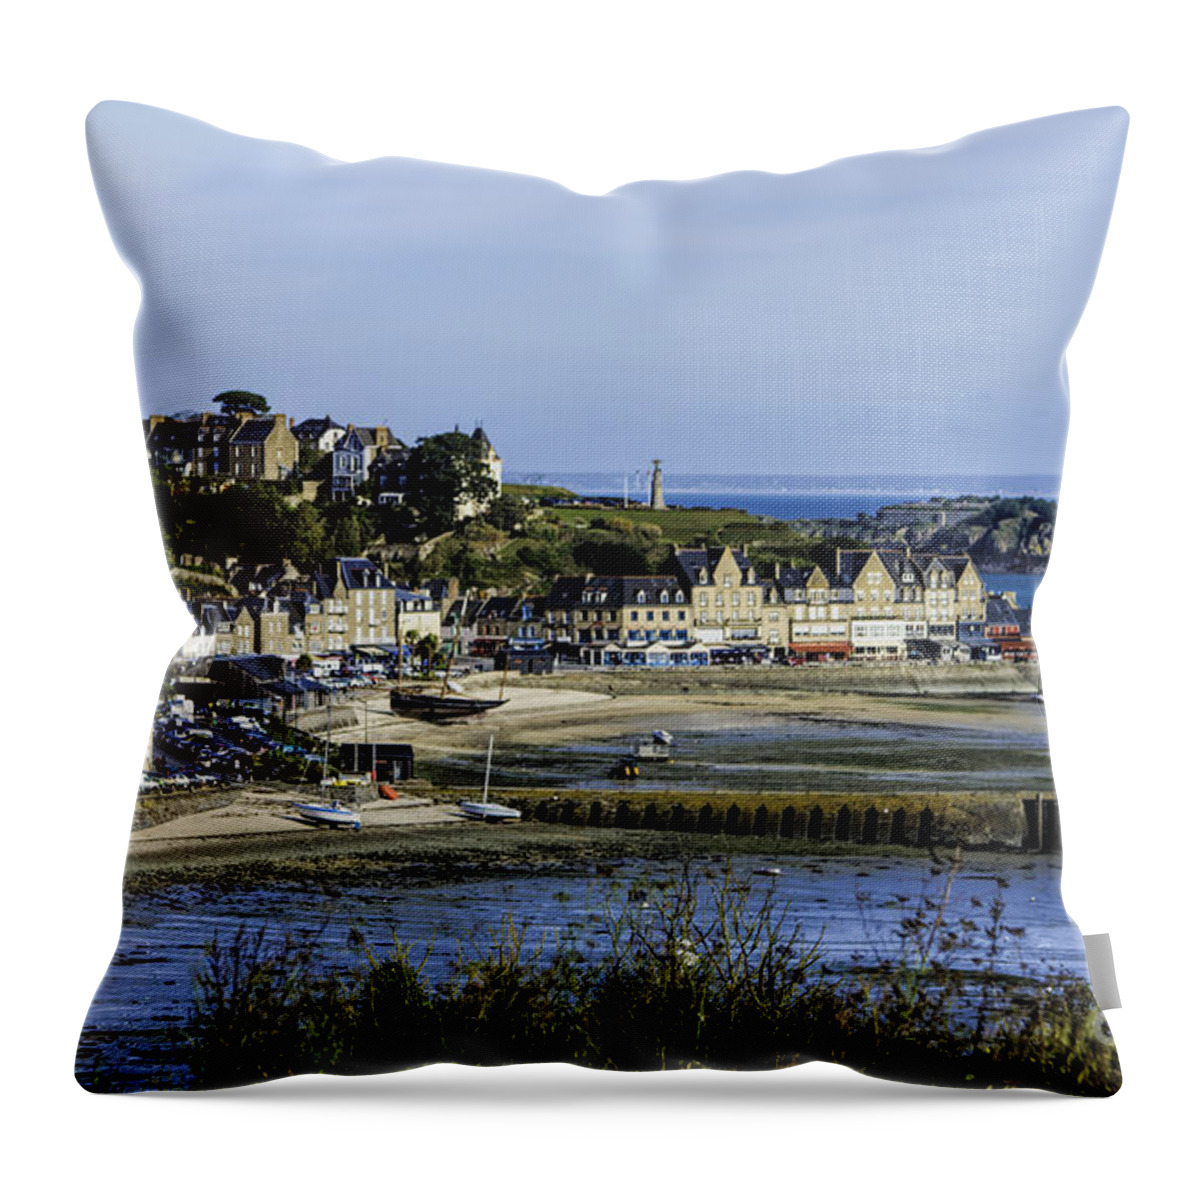 2015 Throw Pillow featuring the photograph Cancale by PatriZio M Busnel